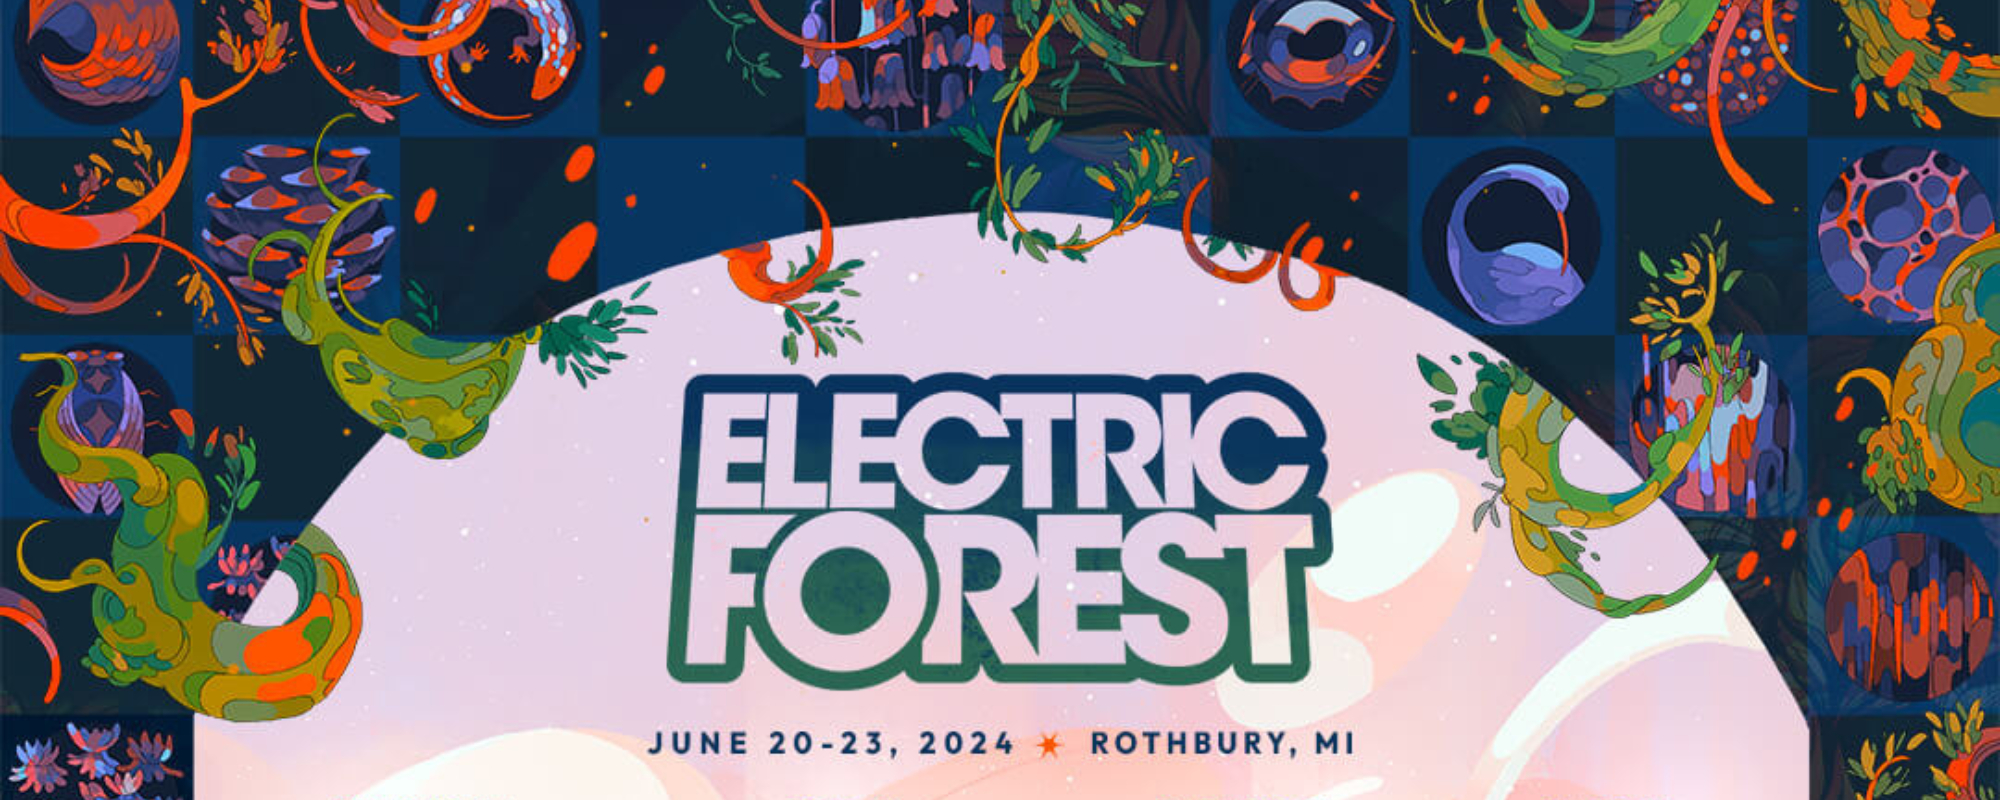 Electric Forest 2024: Lineup, How To Get Tickets, & More